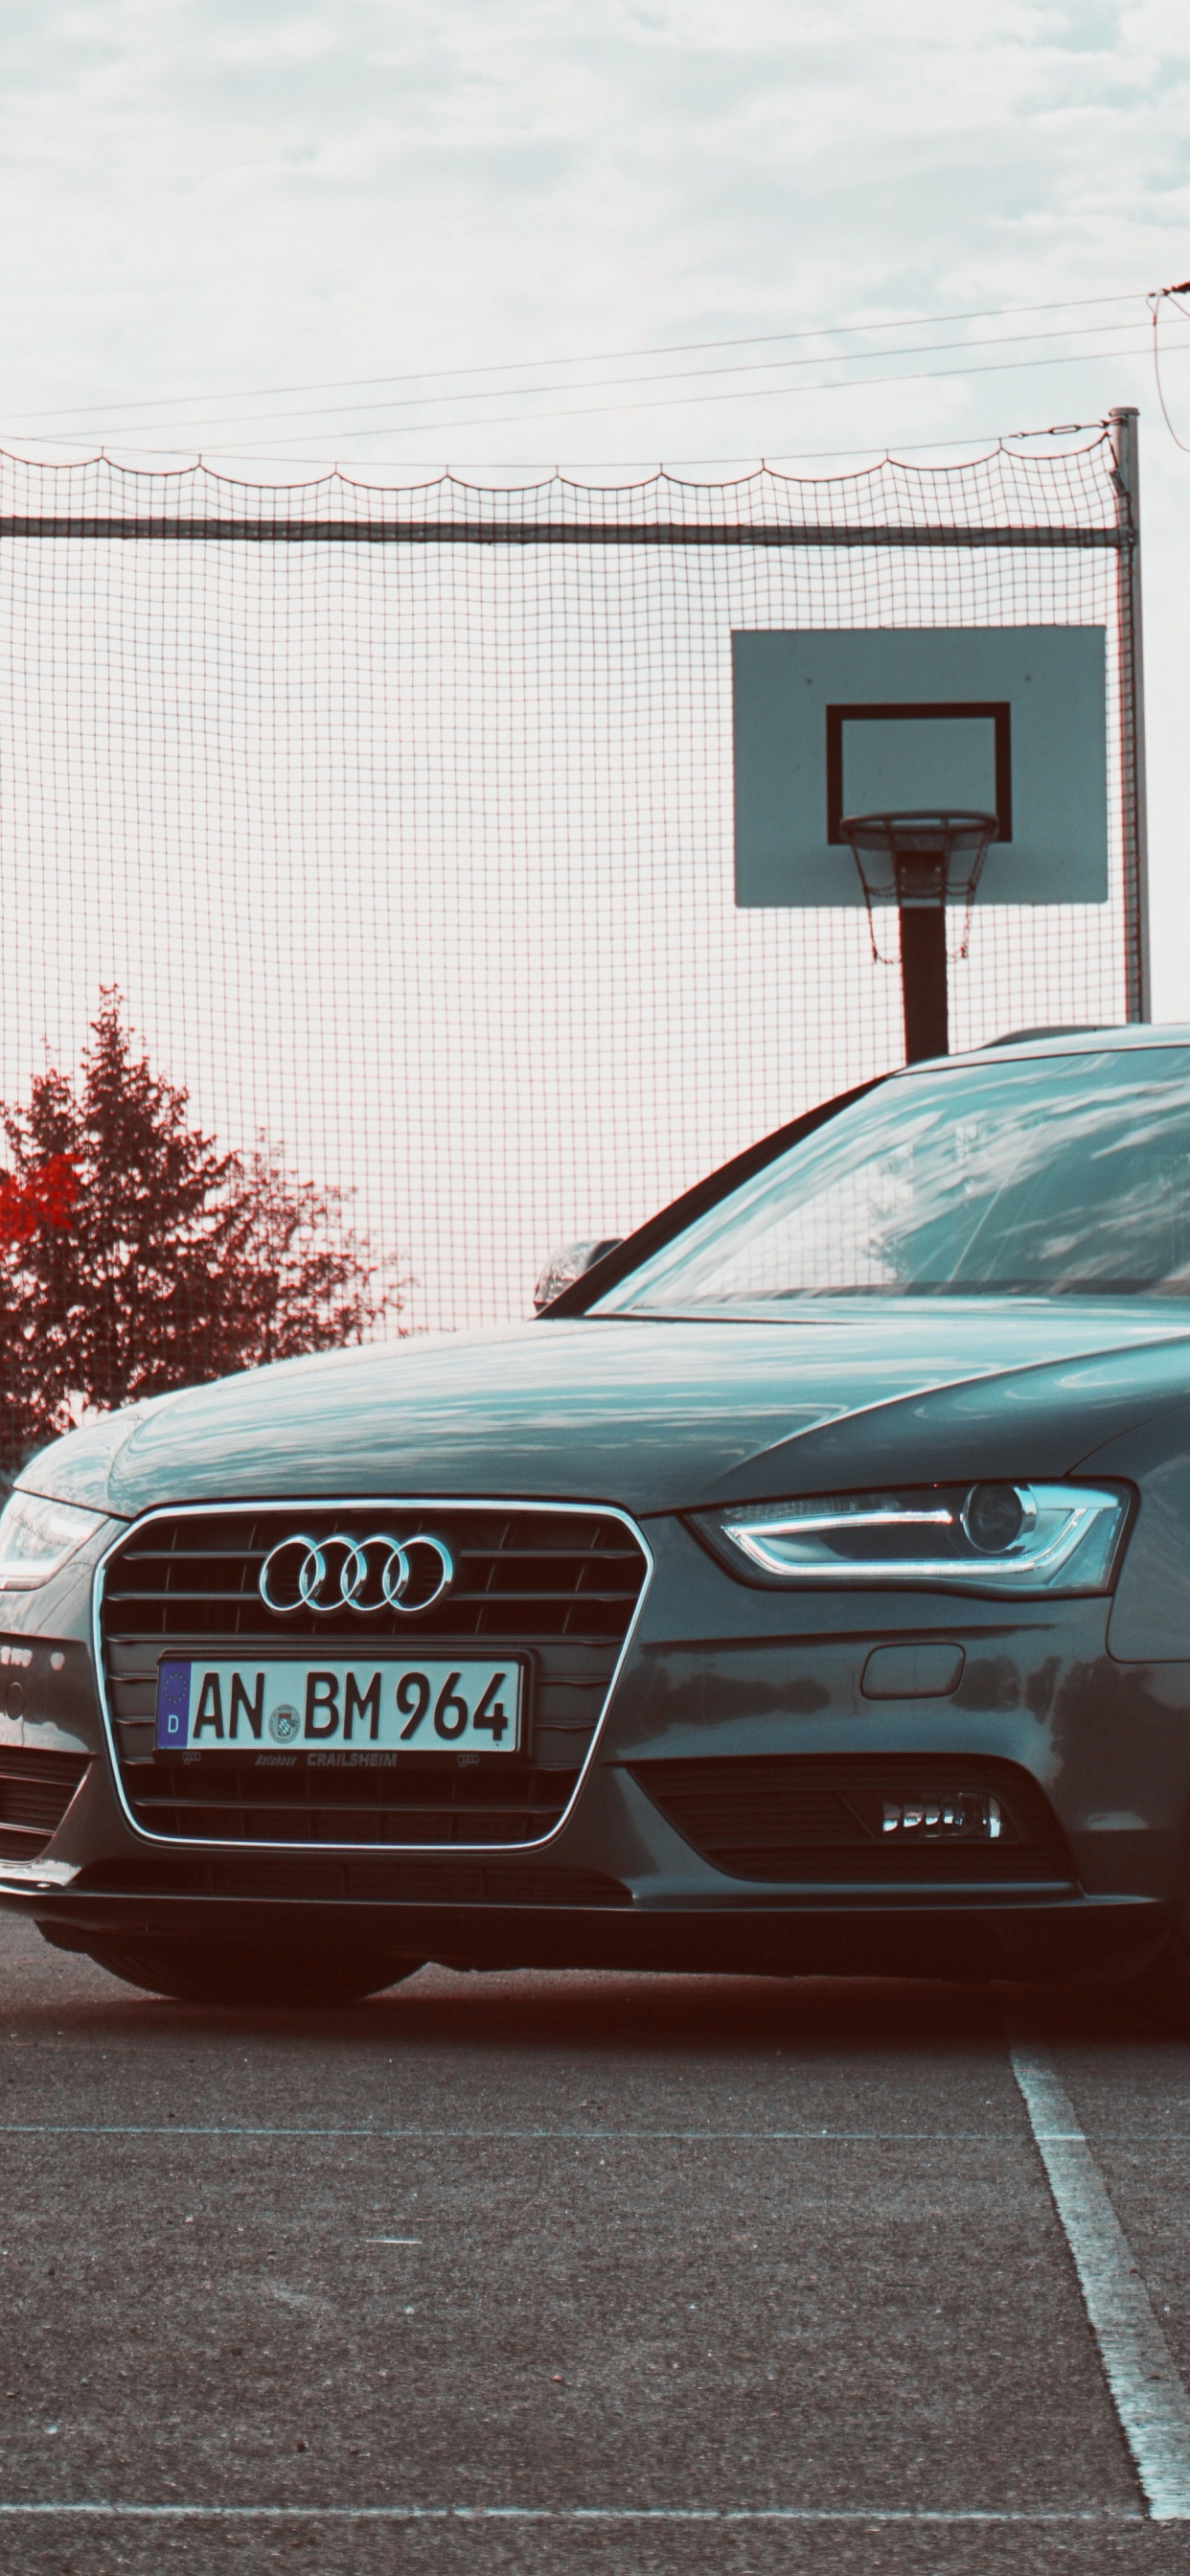 Black Audi Sedan Parked on Gray Concrete Road During Daytime. Wallpaper in 1242x2688 Resolution